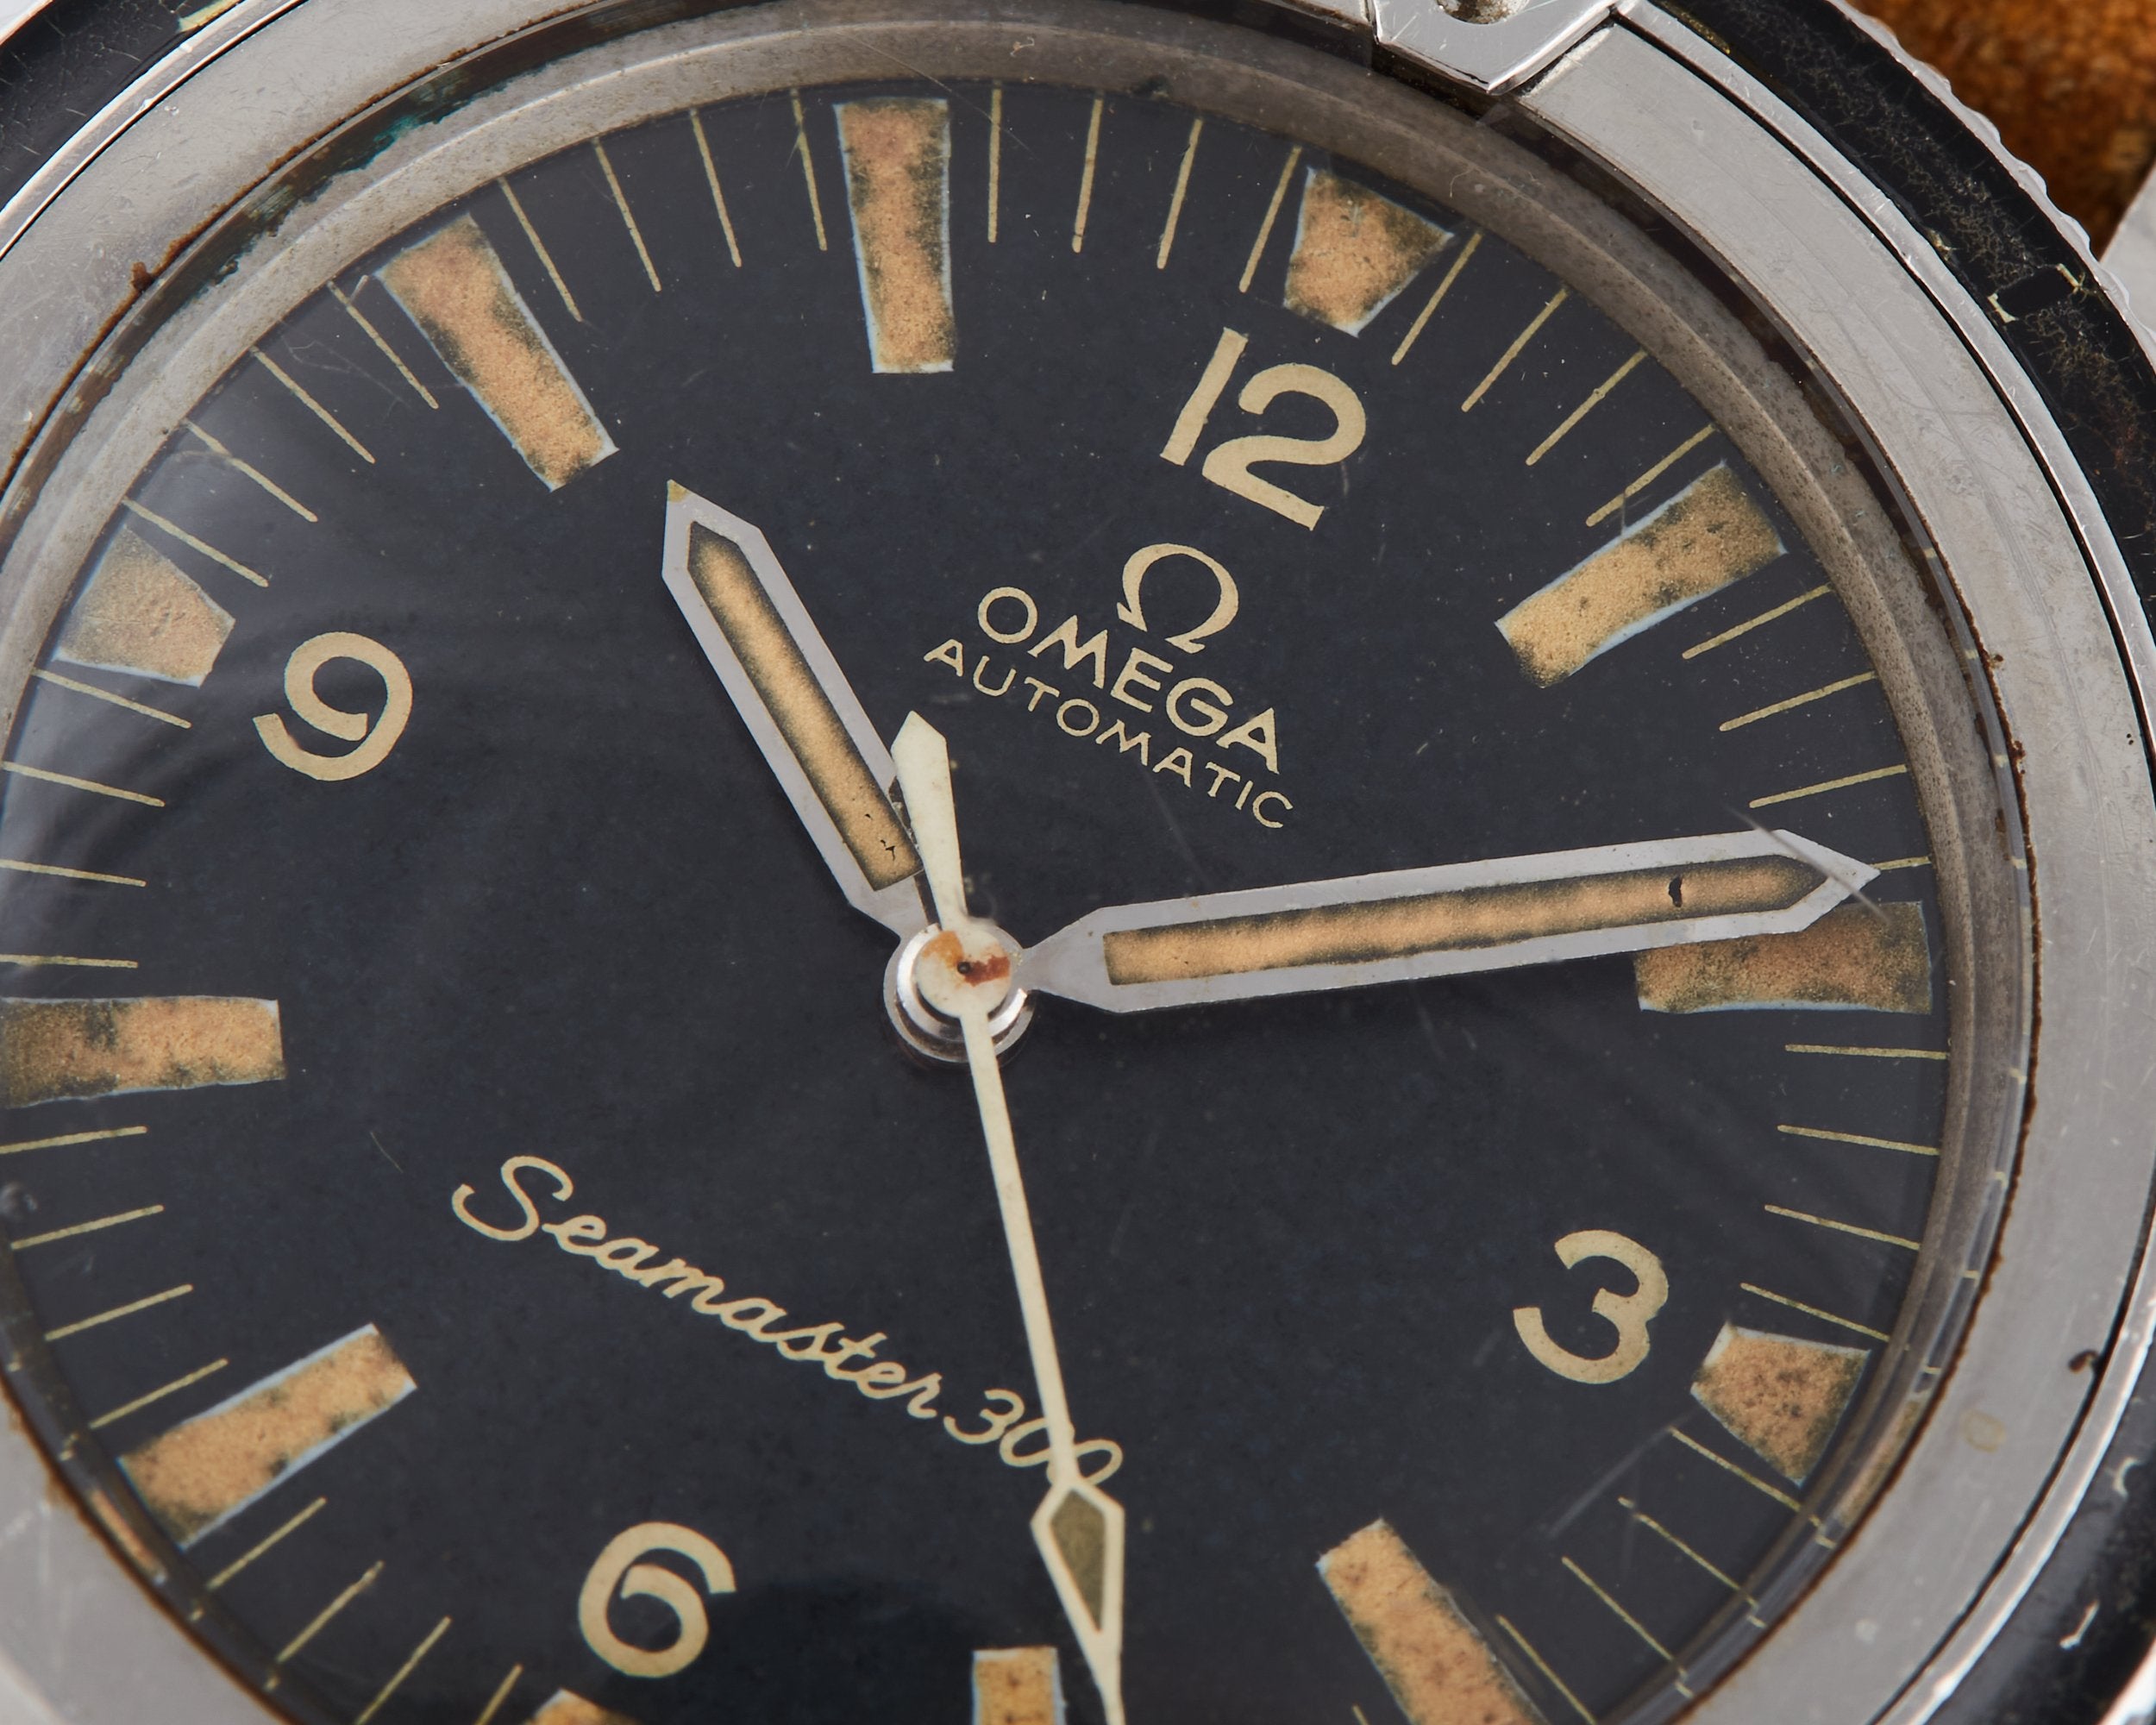 Omega Seamaster 300 Extract from Archives